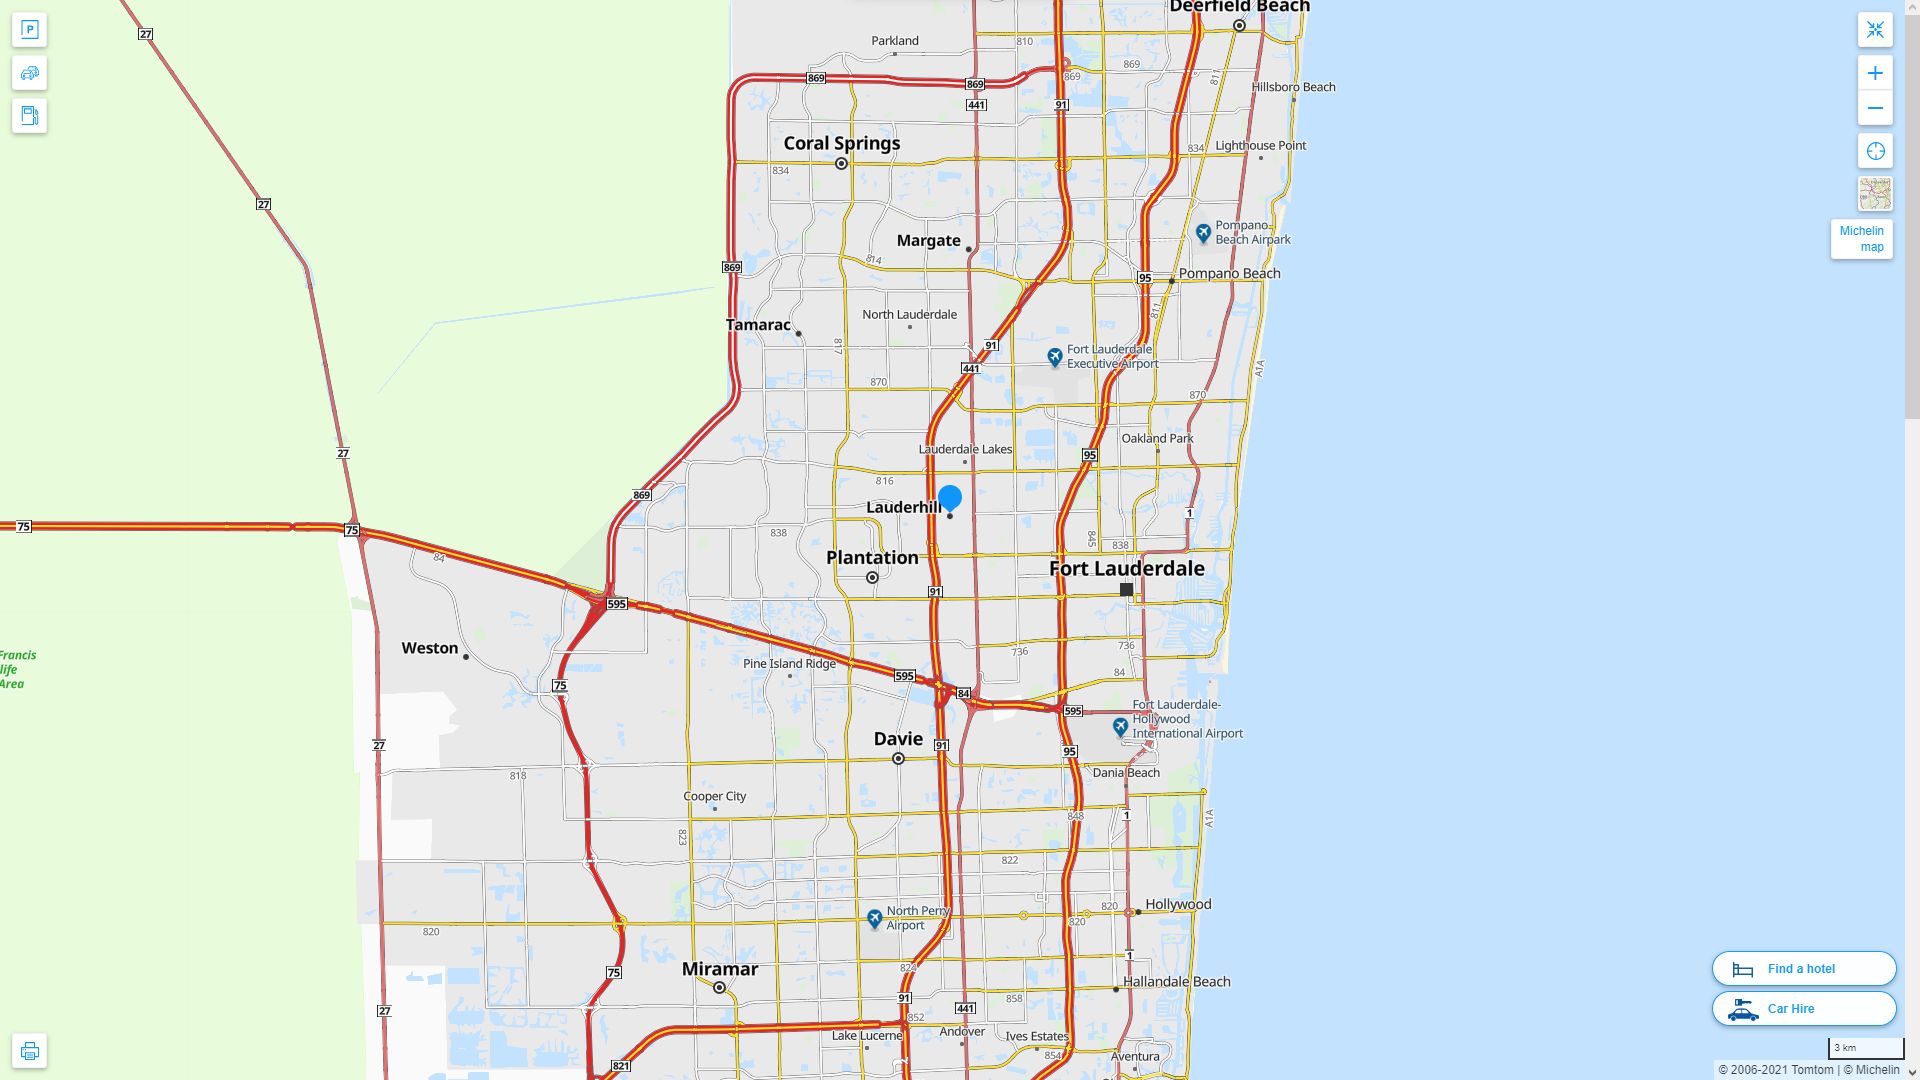 Lauderhill Florida Highway and Road Map